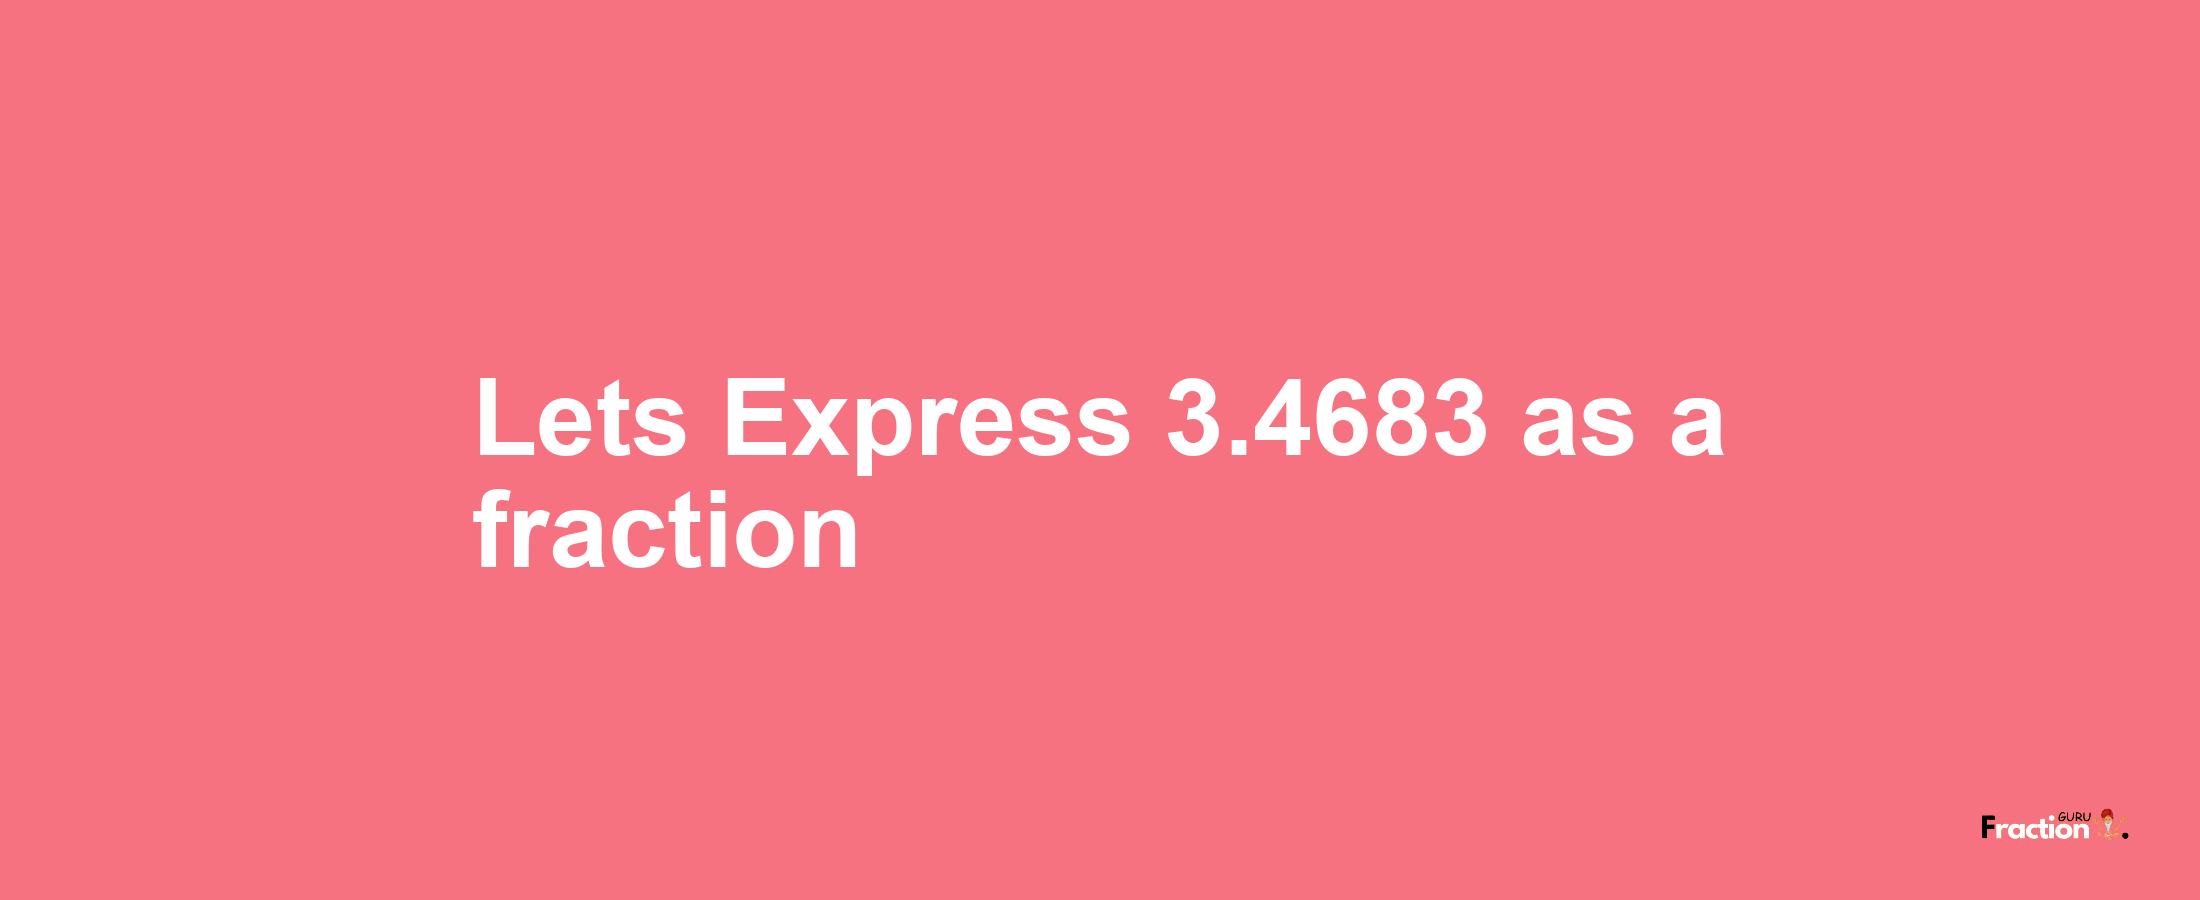 Lets Express 3.4683 as afraction